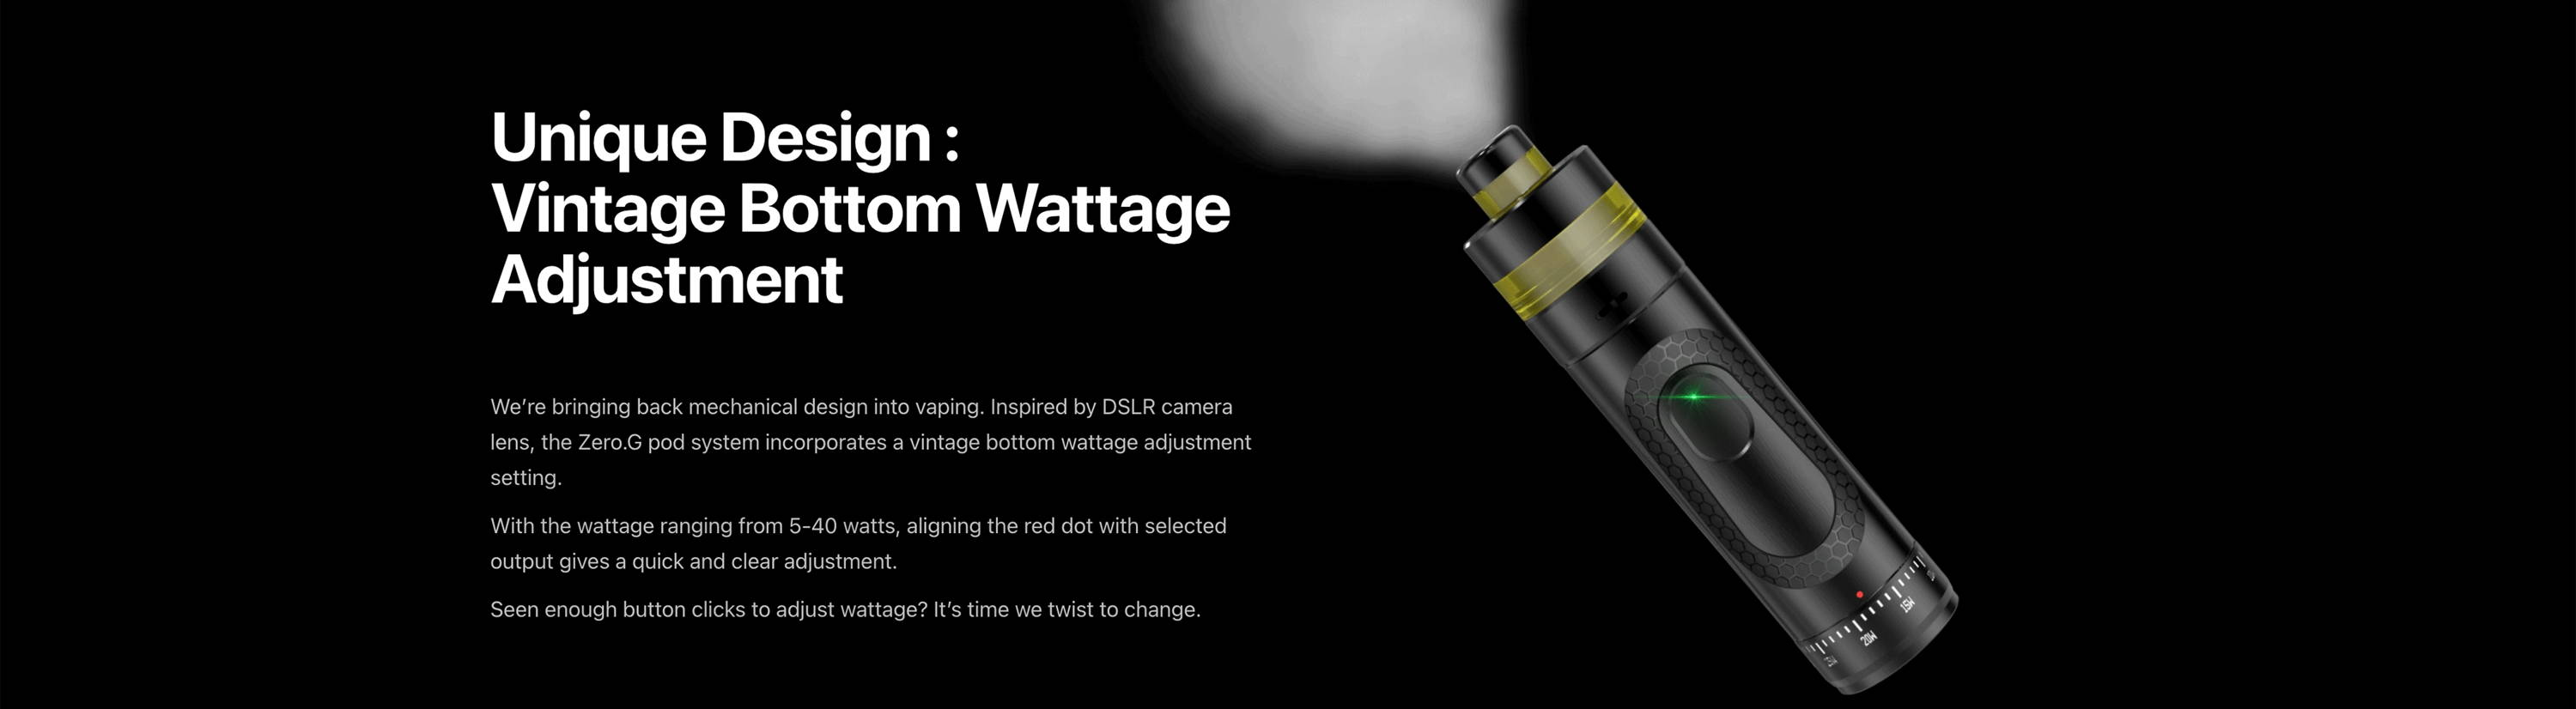 Unique Design : Vintage Bottom Wattage  Adjustment  We’re bringing back mechanical design into vaping. Inspired by DSLR camera lens, the Zero.G pod system incorporates a vintage bottom wattage adjustment setting. With the wattage ranging from 5-40 watts, aligning the red dot with selected output gives a quick and clear adjustment. Seen enough button clicks to adjust wattage? It’s time we twist to change.